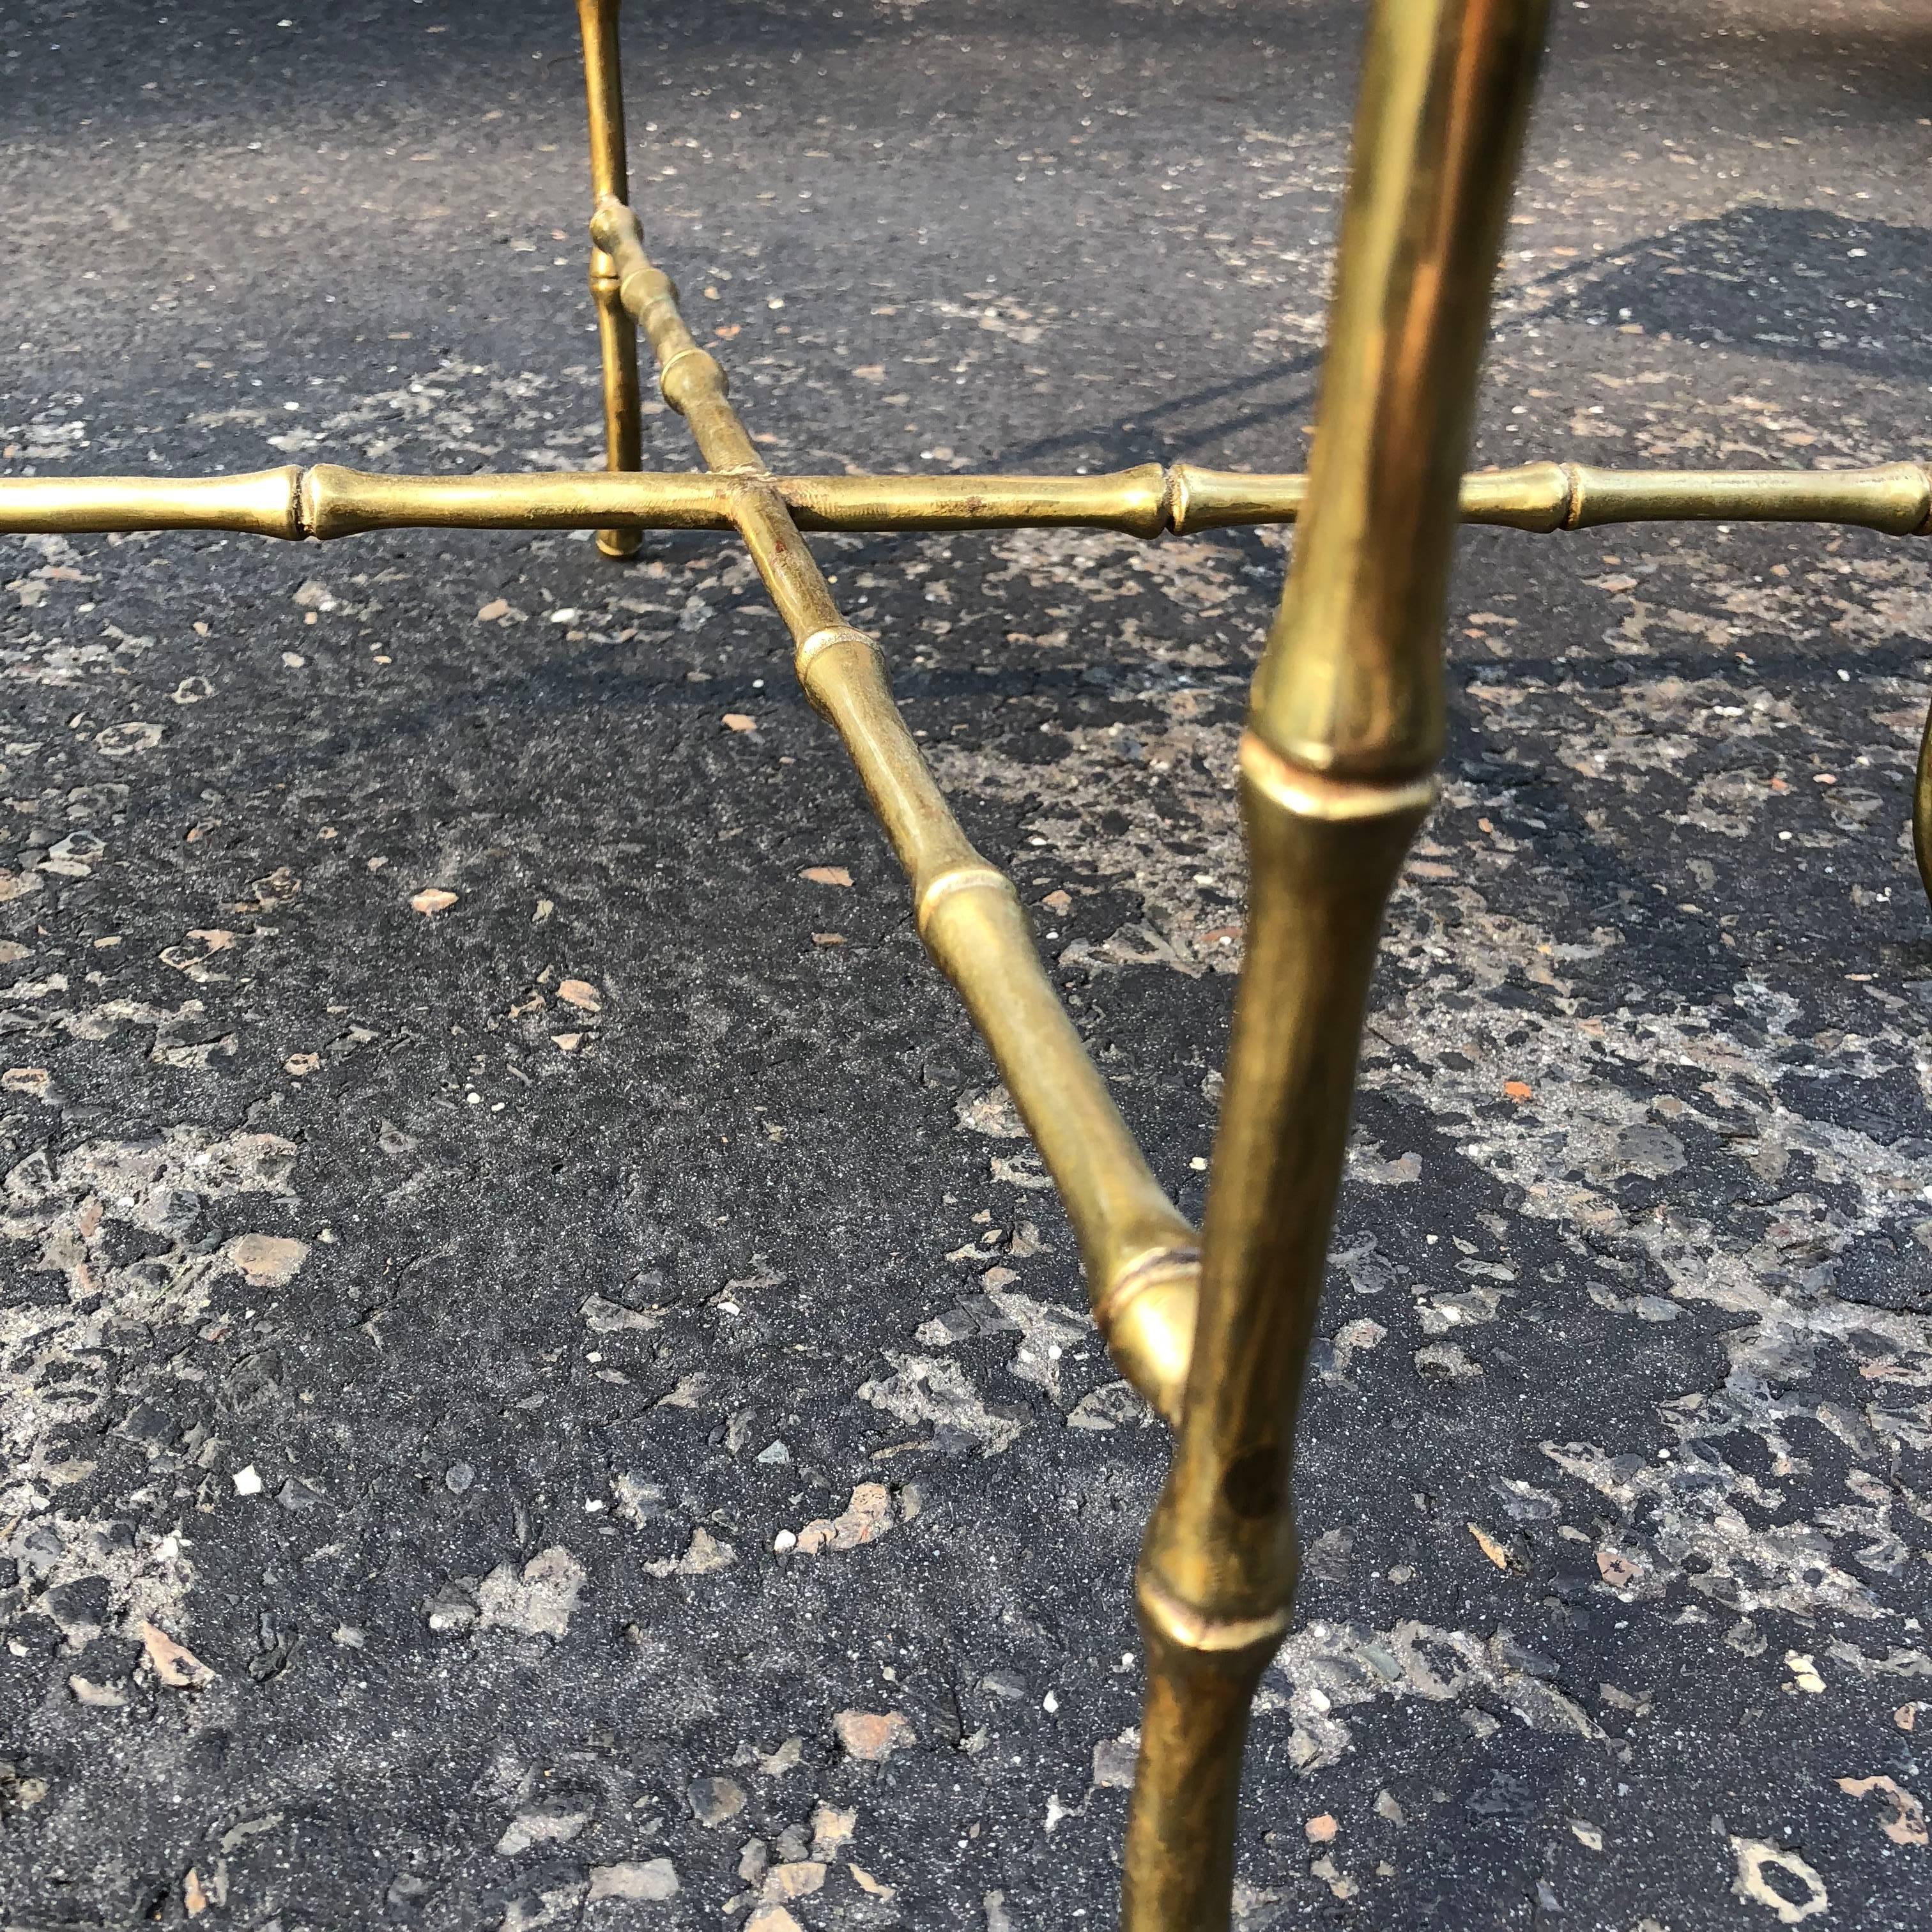 French Square Faux Bamboo Marble-Top And Brass Side Table For Sale 13